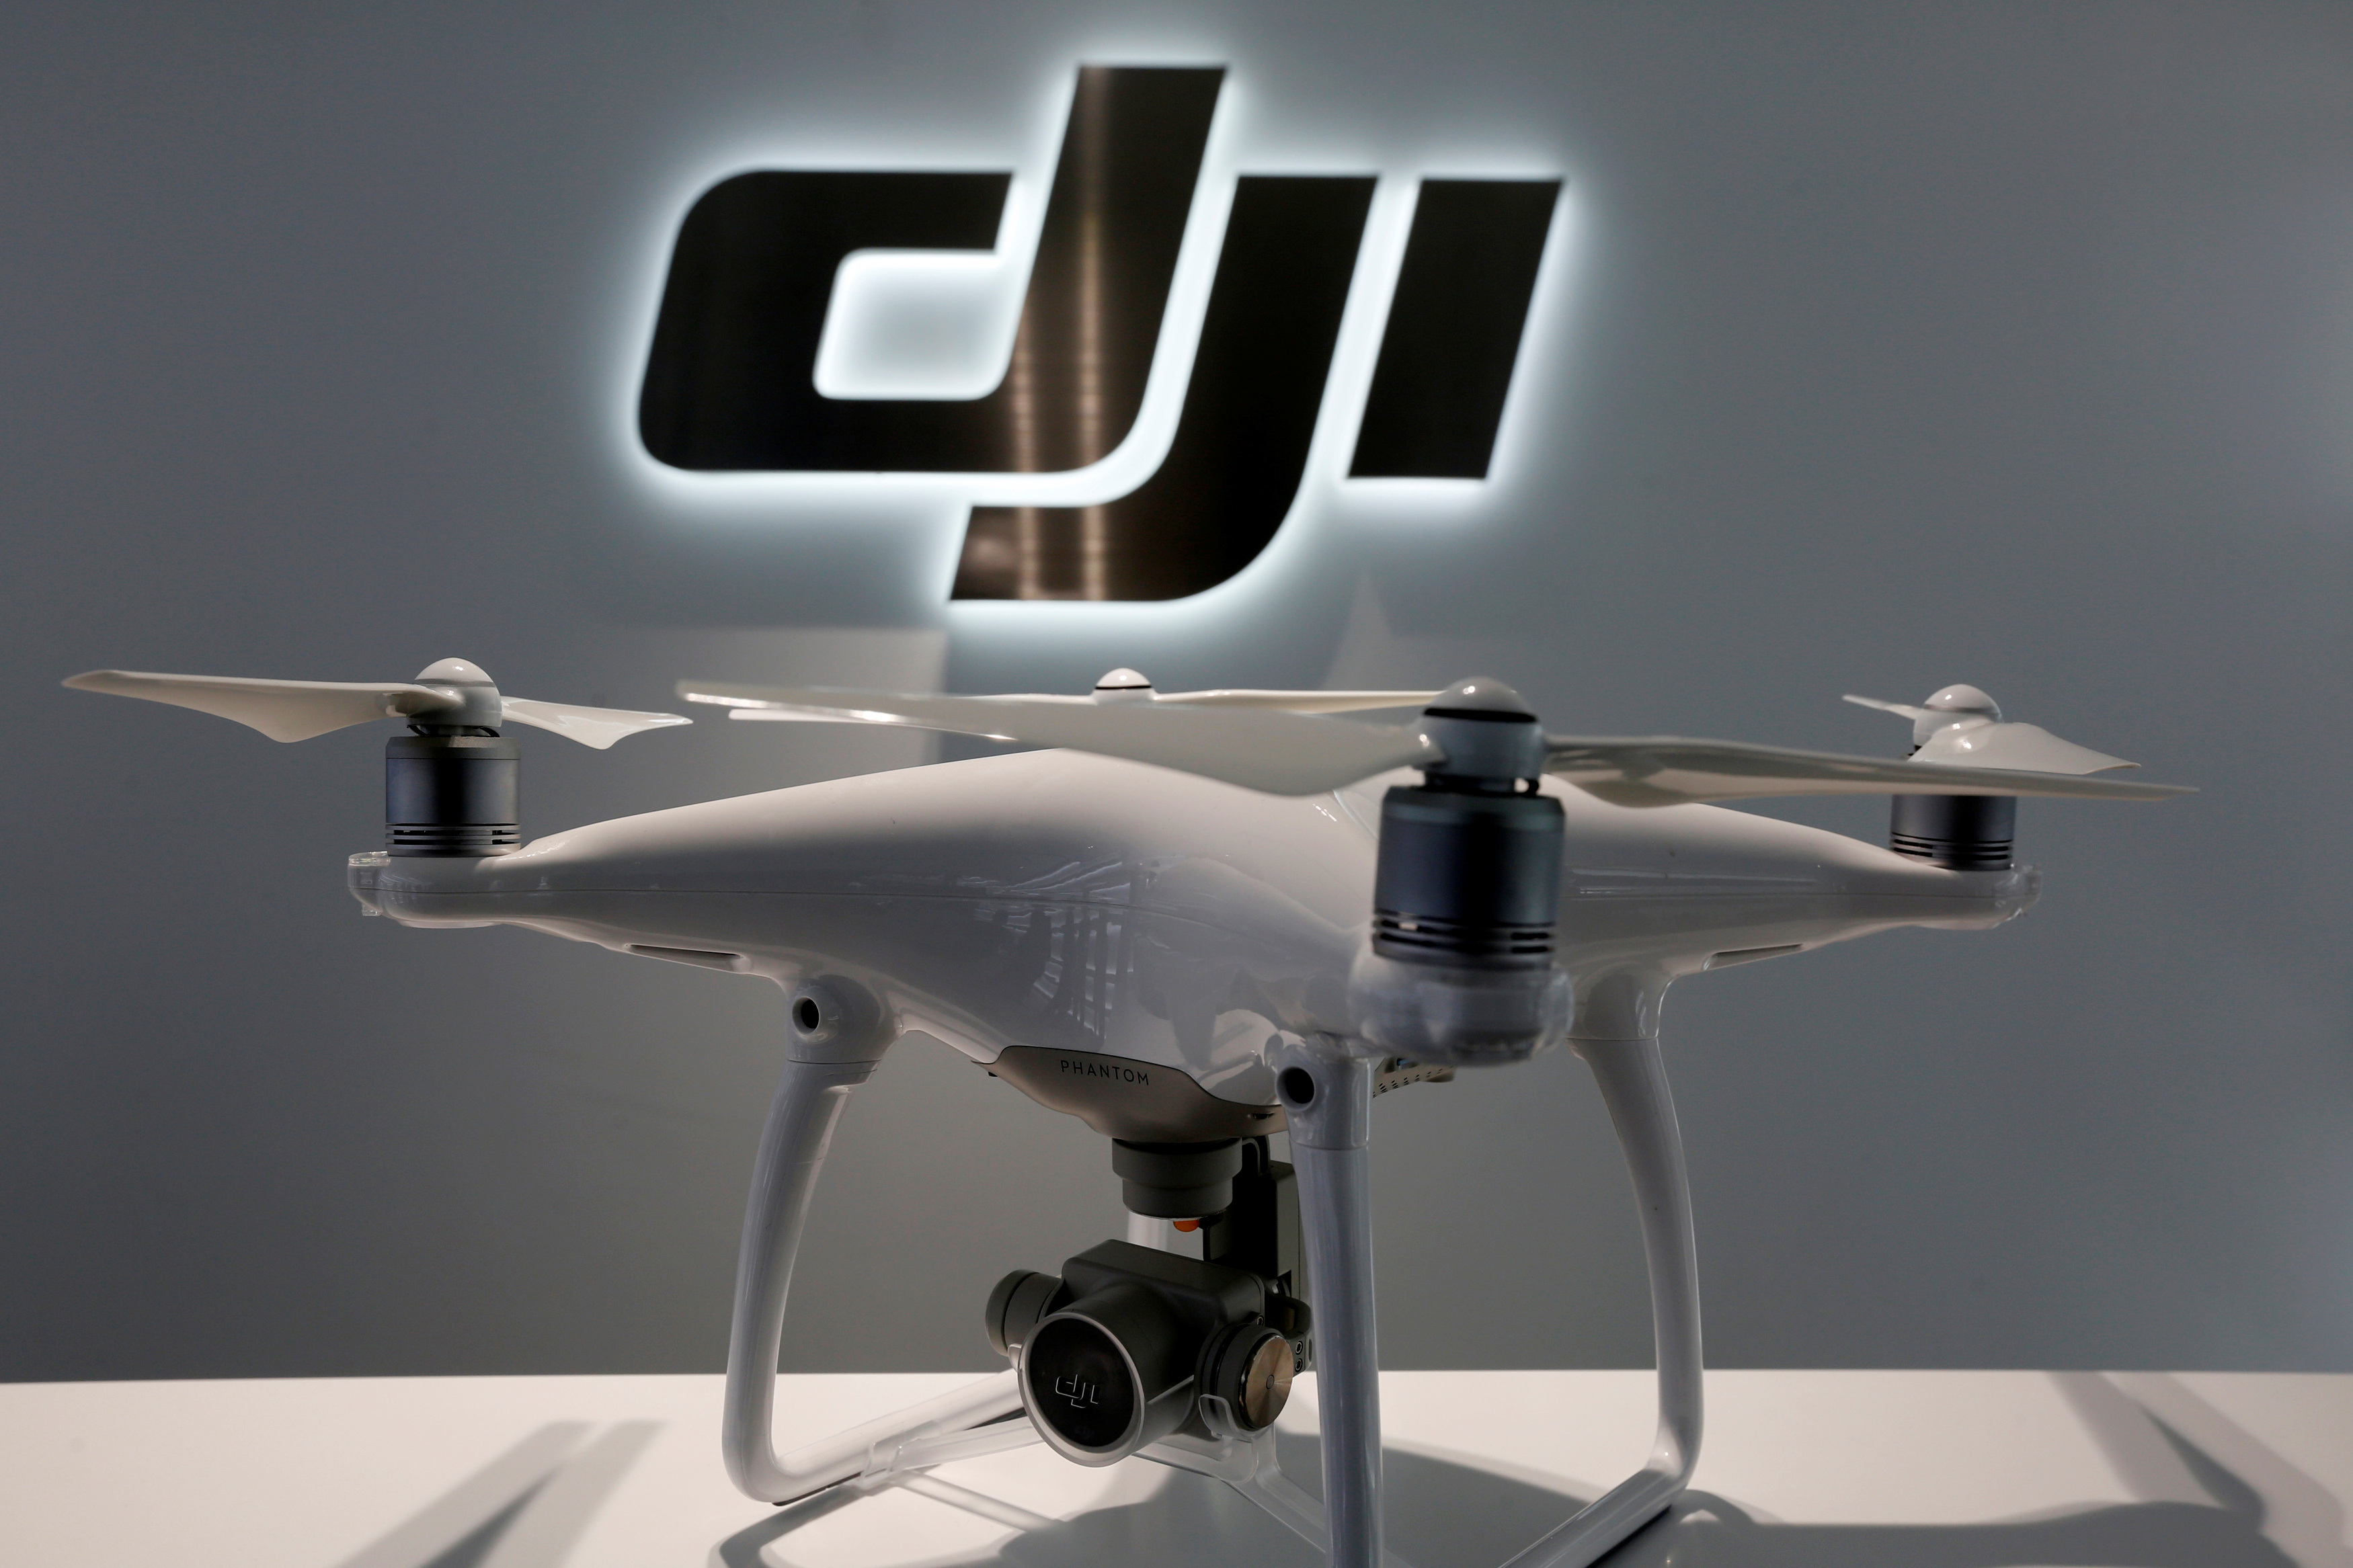 Chinese drone company DJI received funding from Chinese government